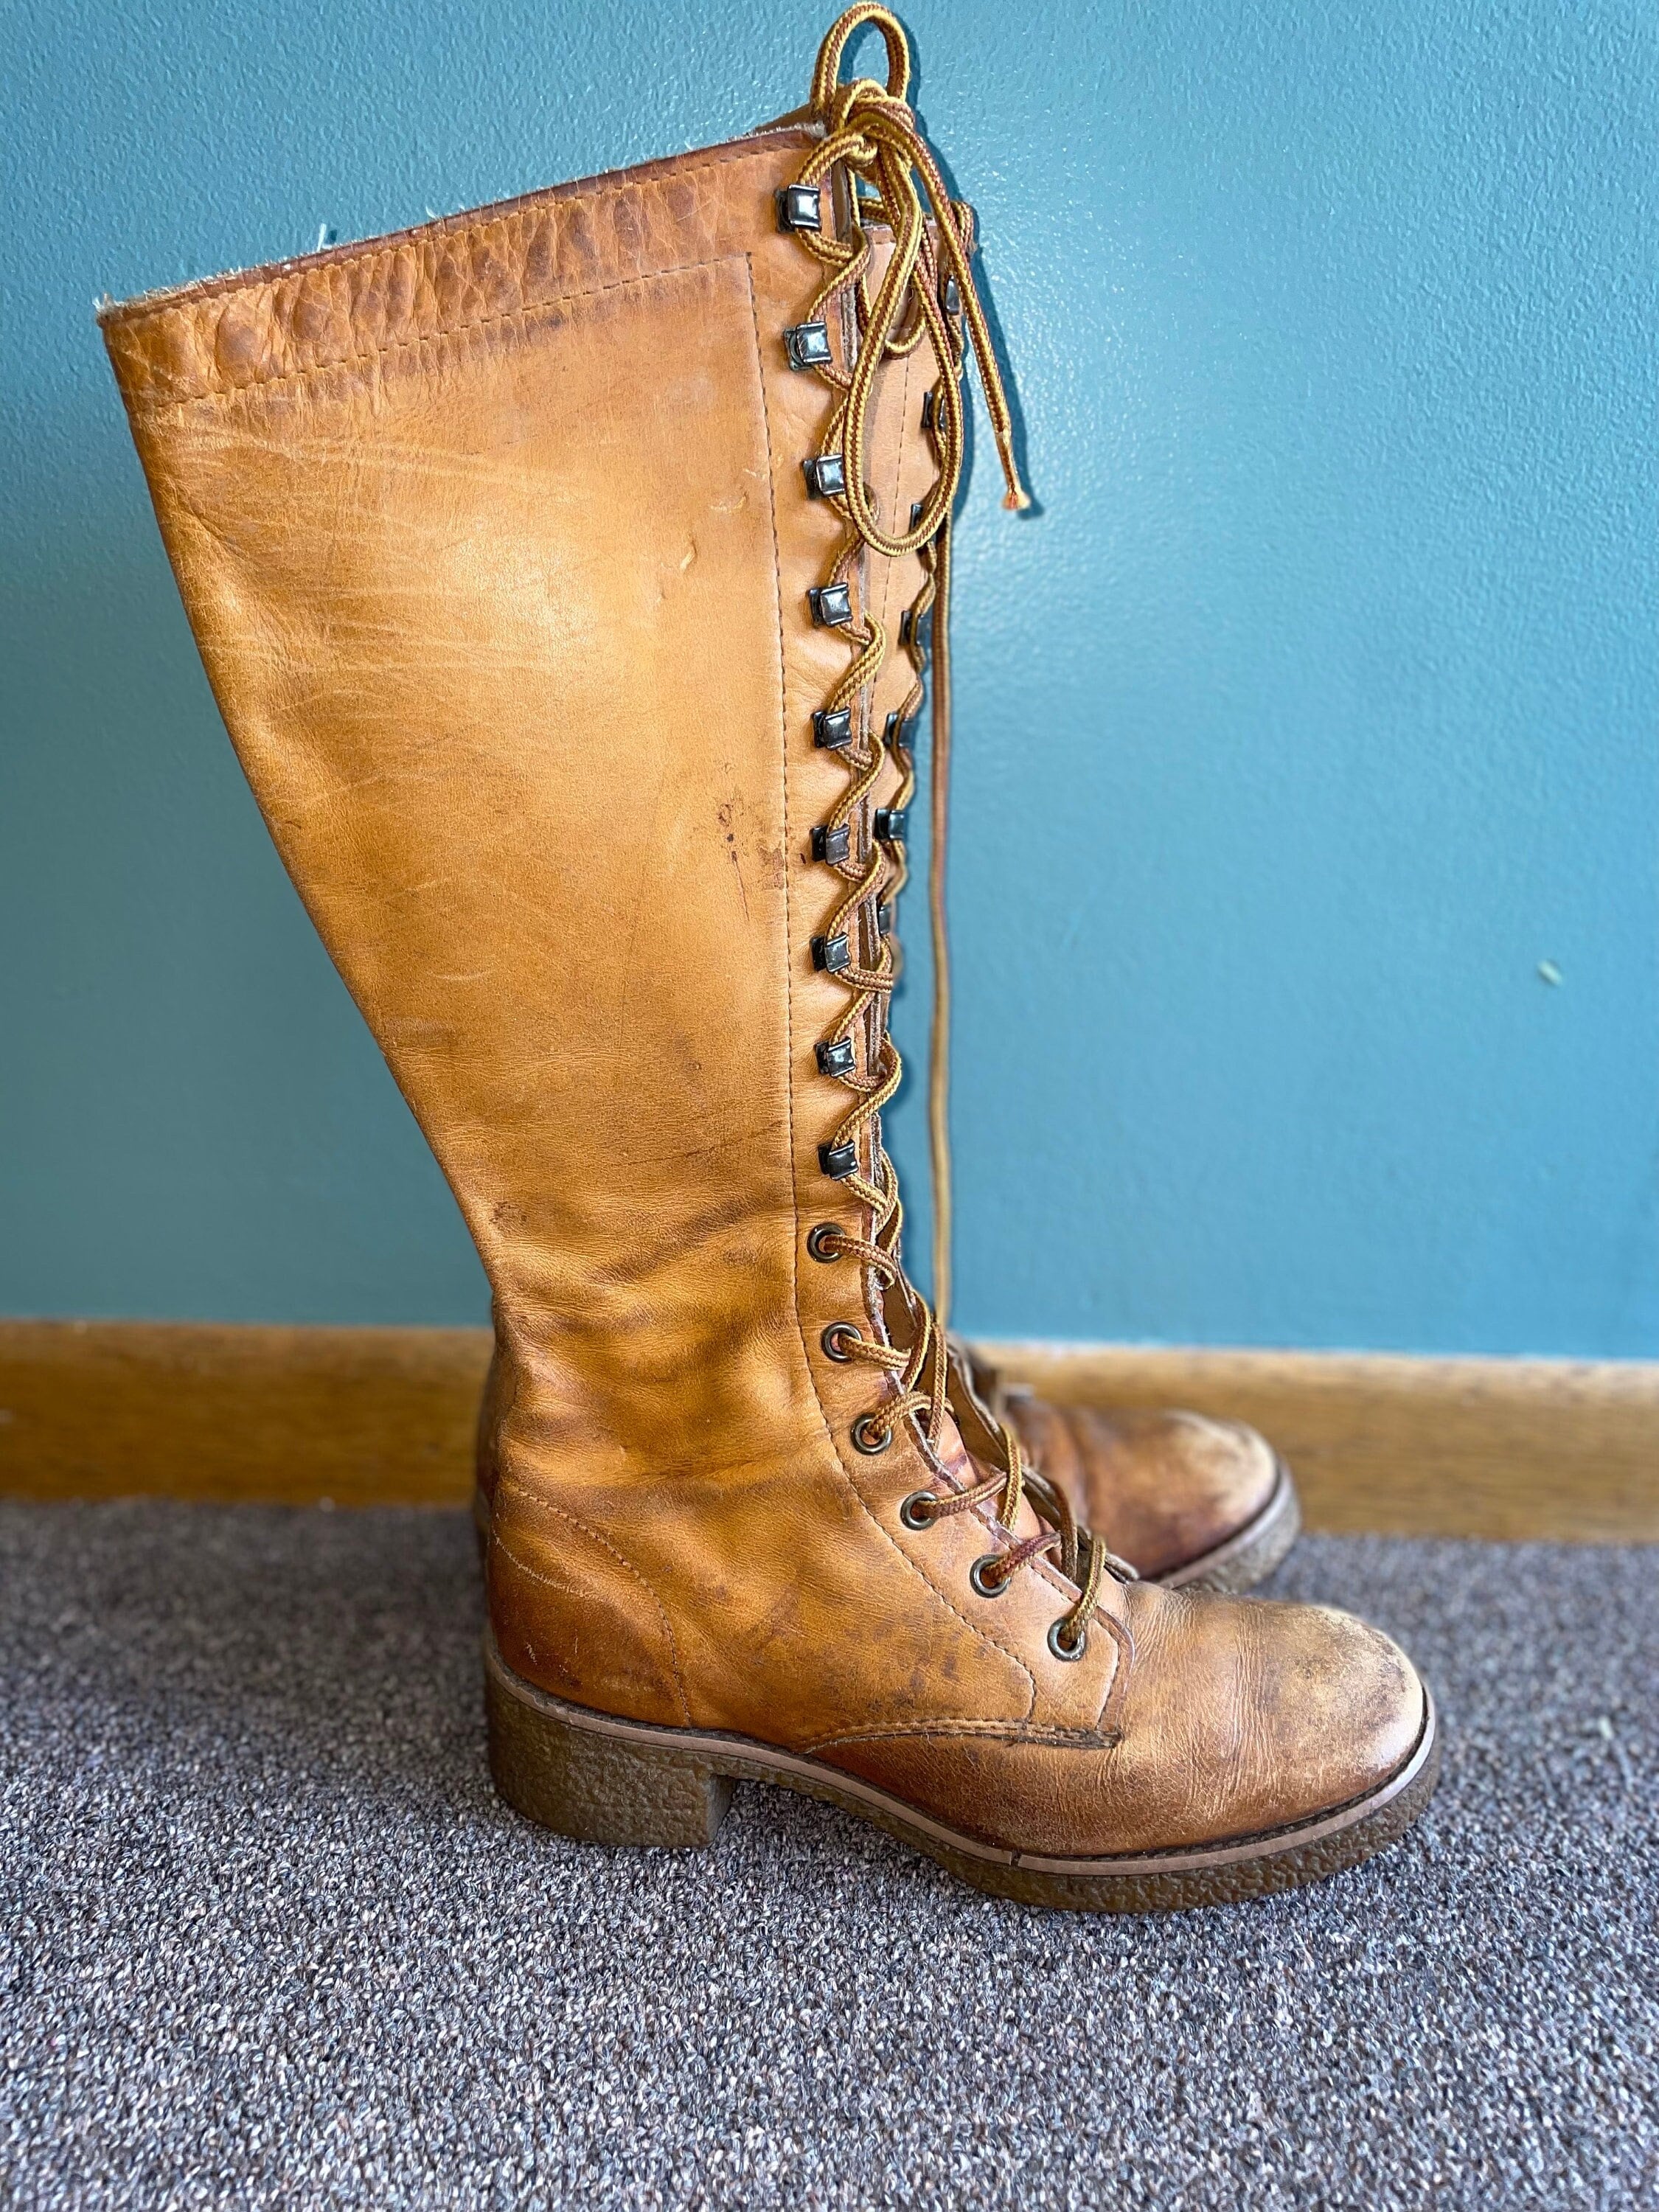 Vintage Bort Carleton Tall Leather Lace Up Boots, 1970s stacked wood heel  campus boots, 70s blue laced combat hippie gypsy boots, Women's 8